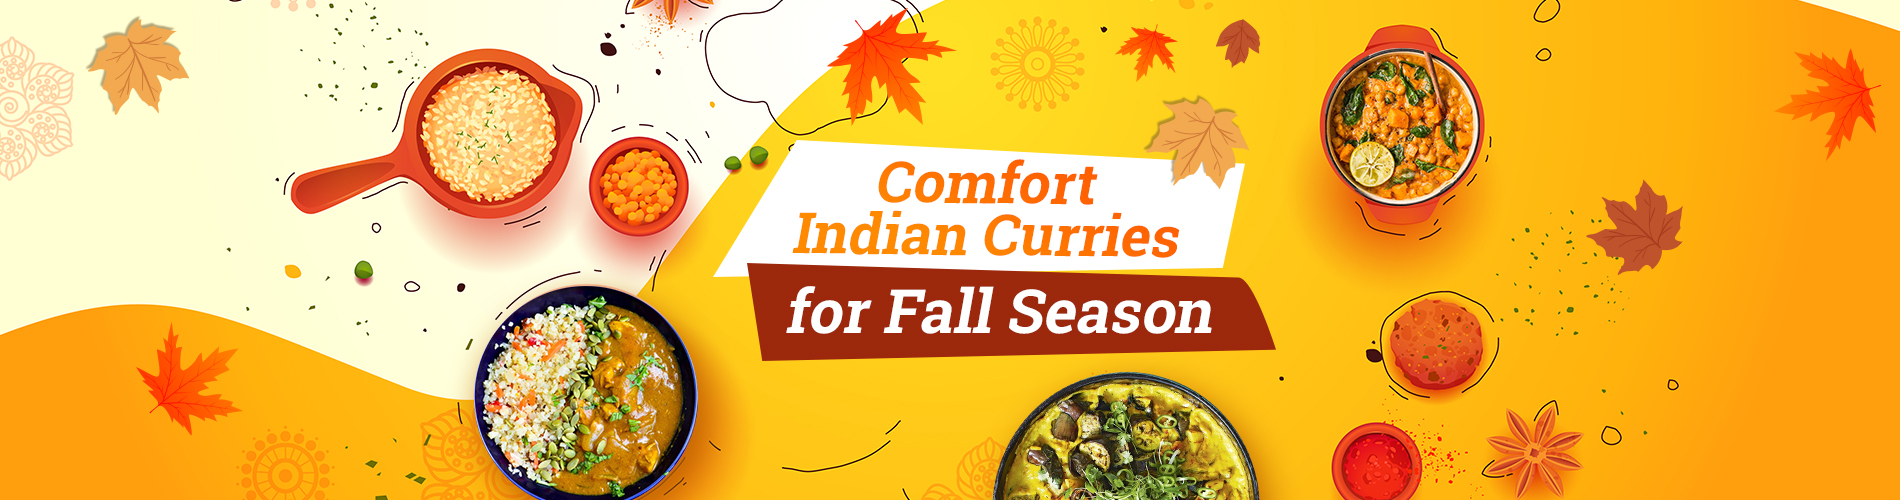 Comfort Indian Curries for Fall Season 